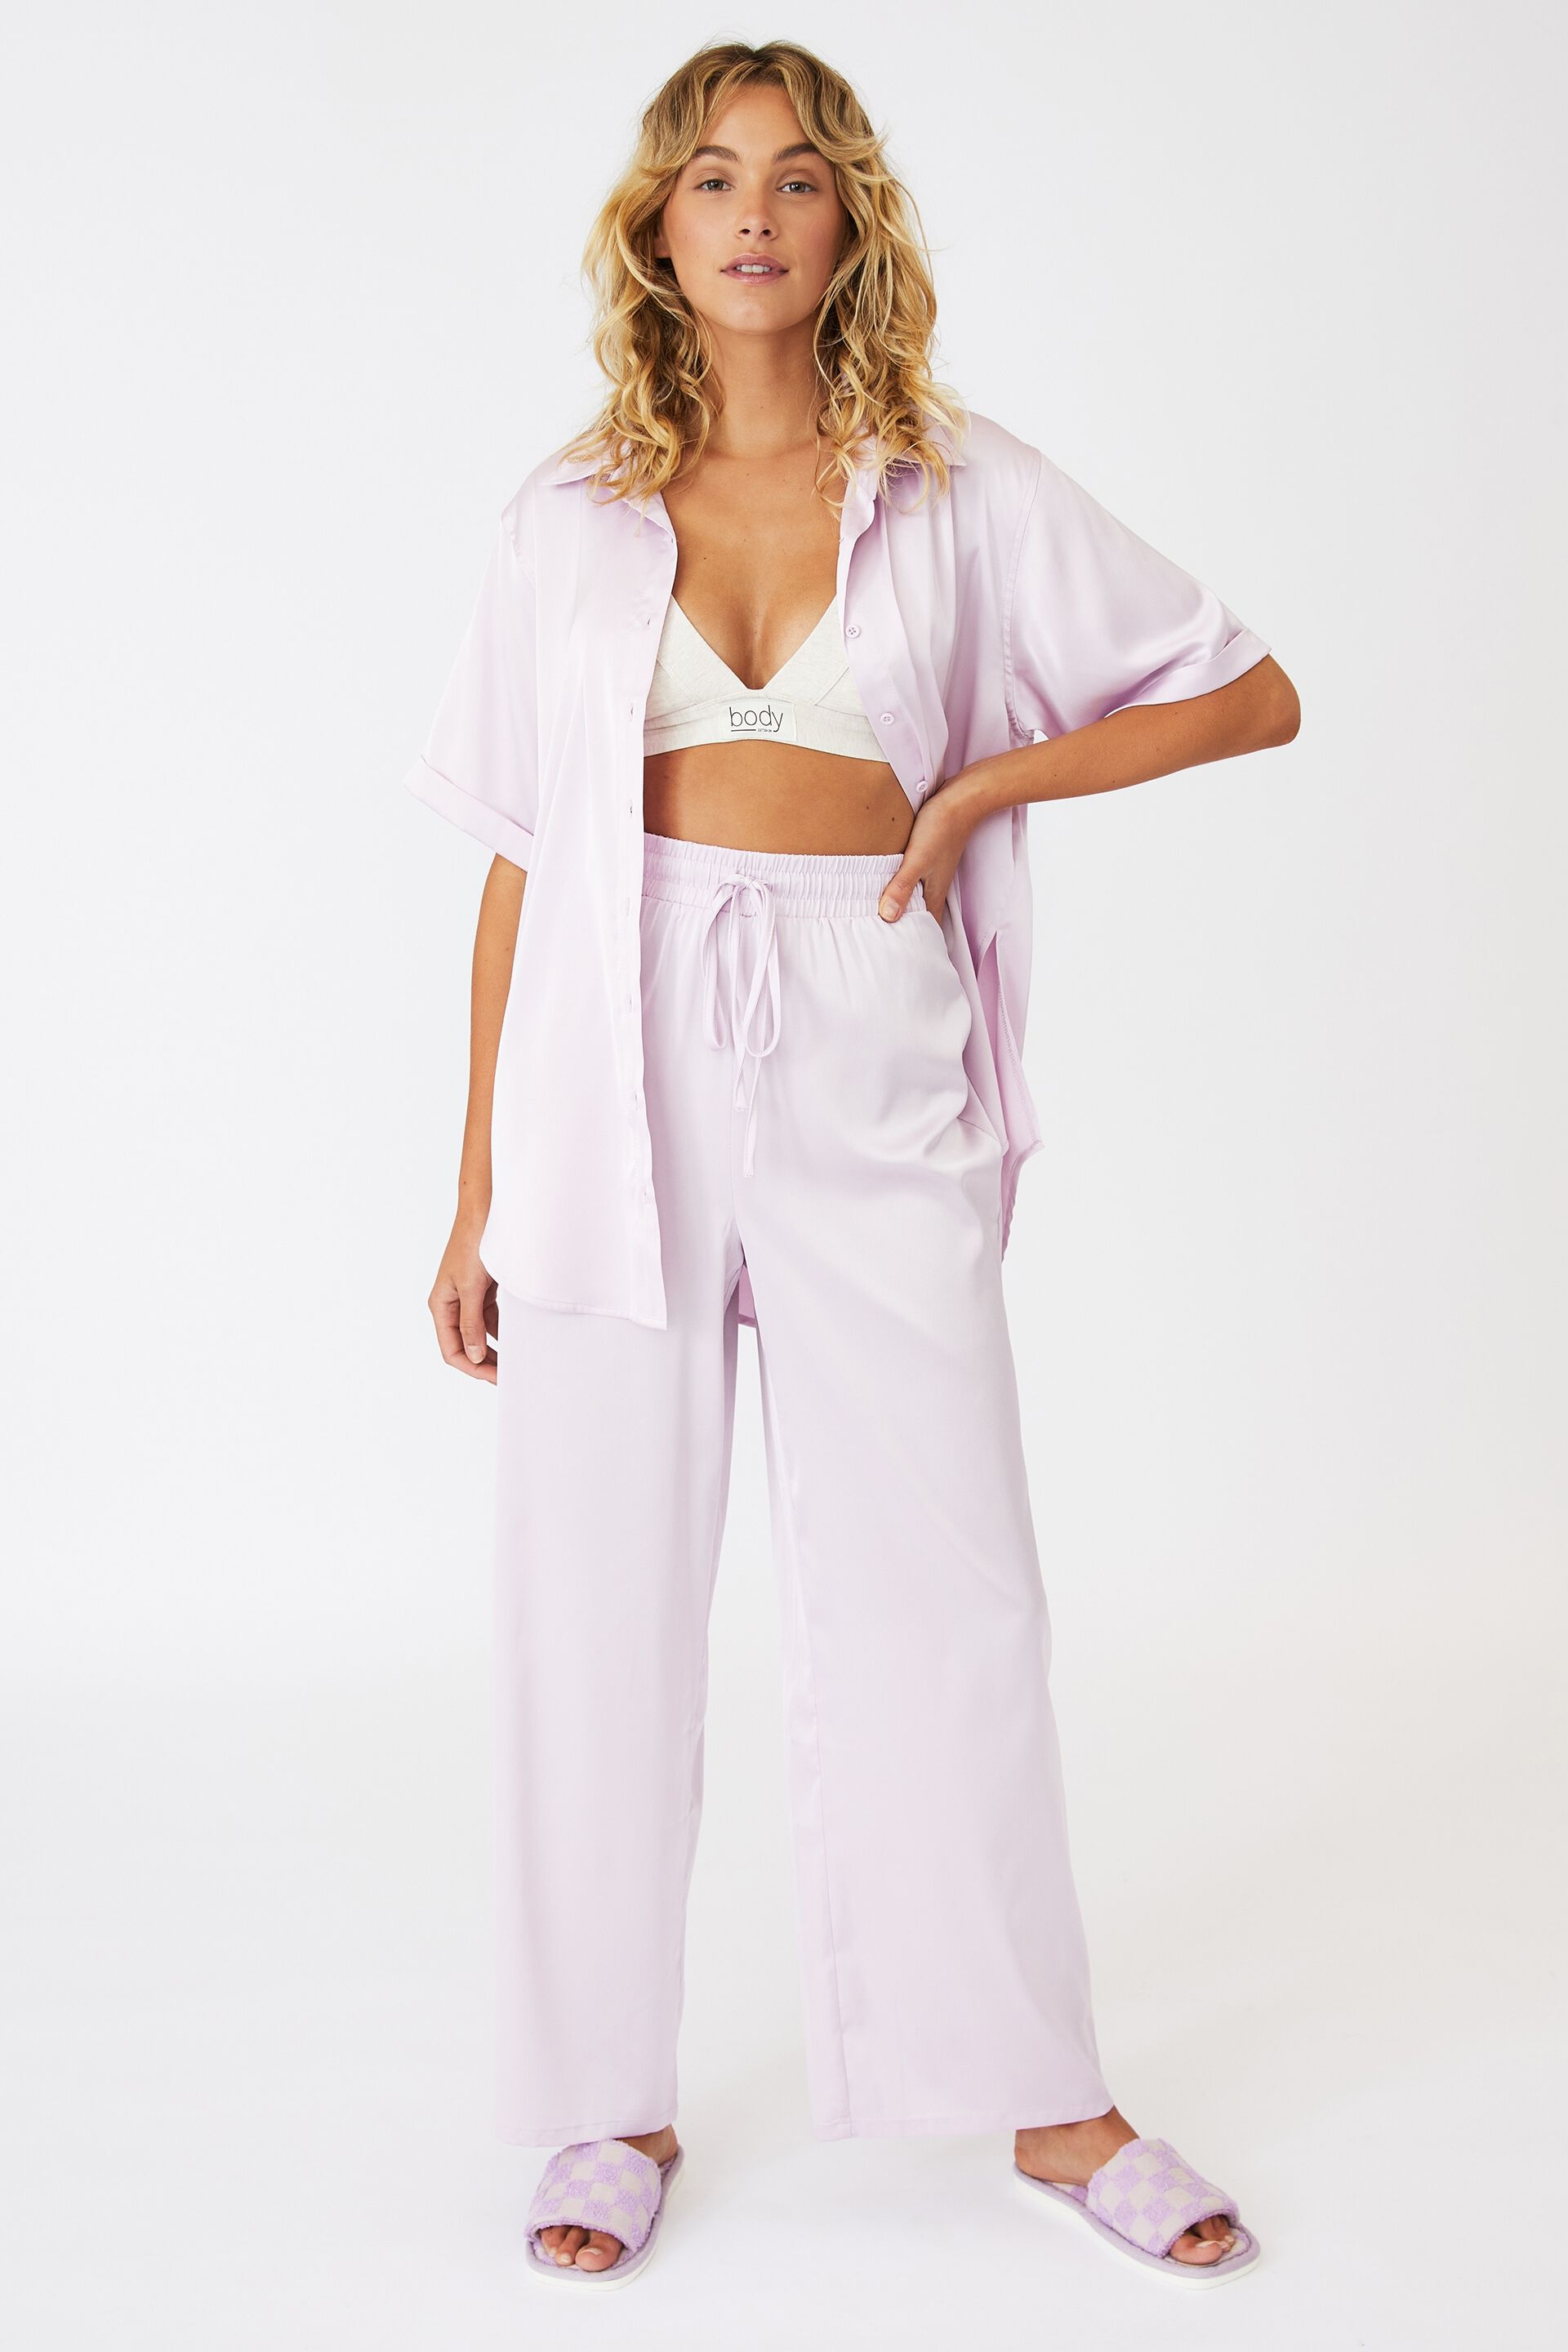 Gifts Gifts For Her | Satin Sleep Pant - CD68329